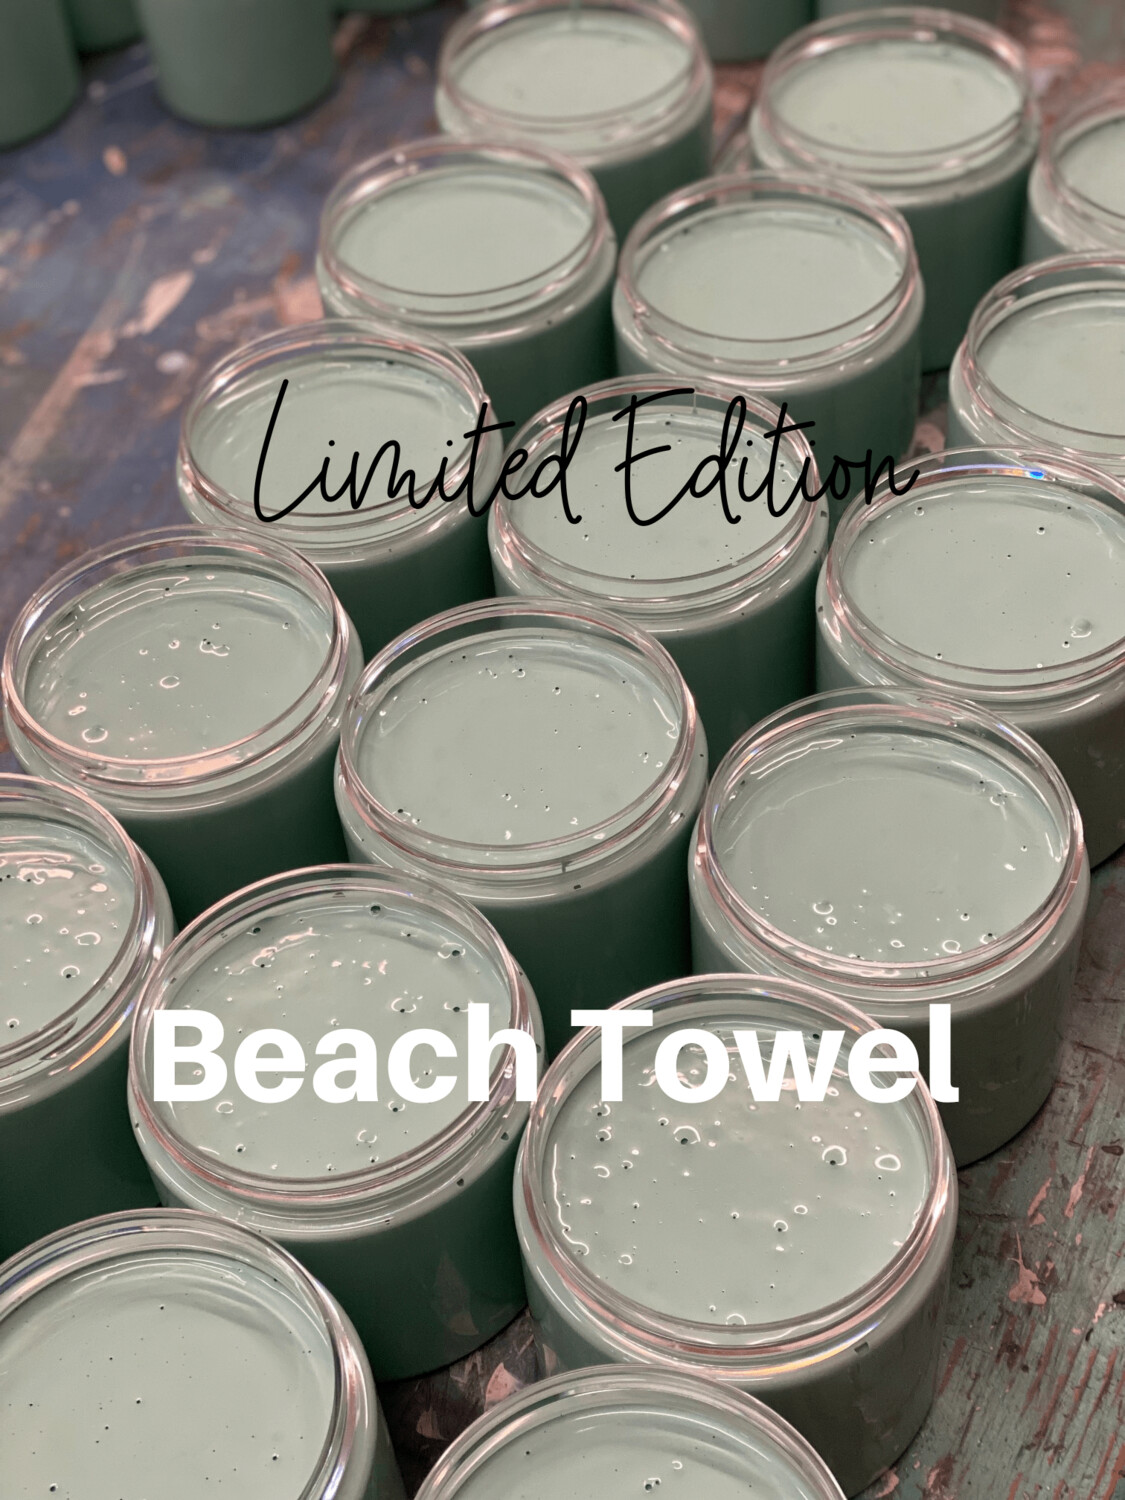 Beach Towel Limited Edition Furniture Paint by Bungalow 47